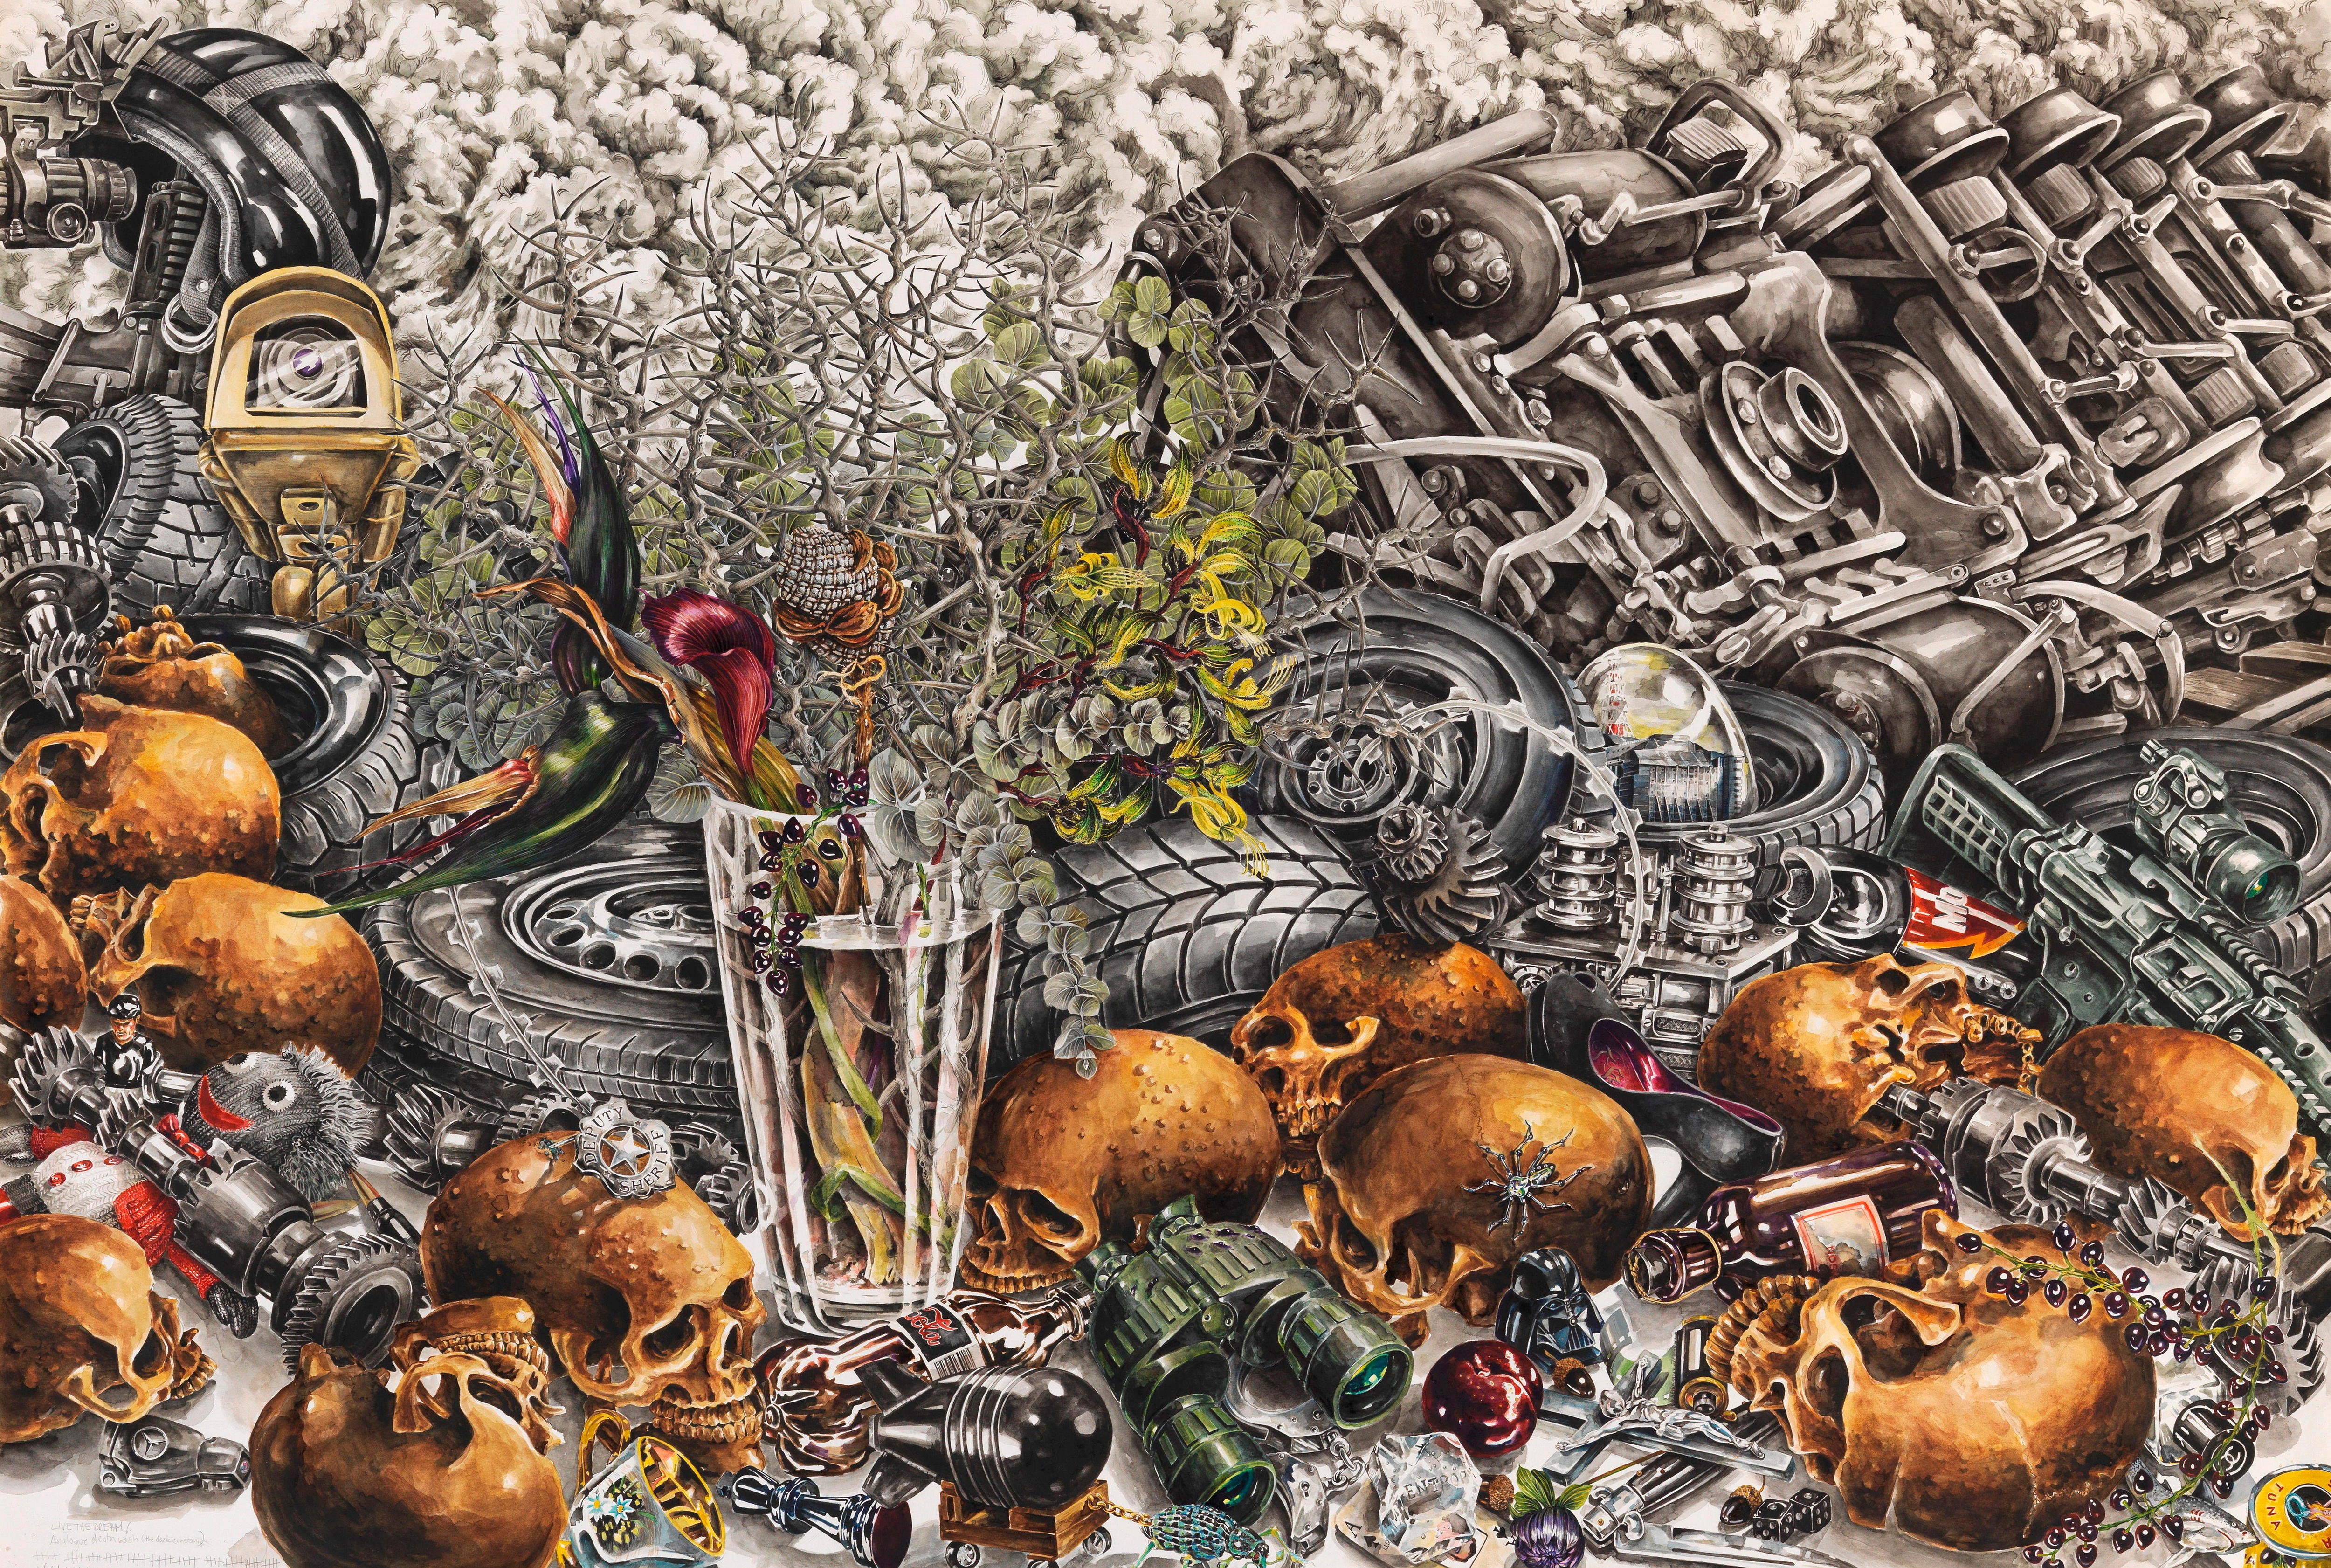 A highly detailed painting of a vase of flowers sitting amongst old tyres and machine parts and golden skulls.